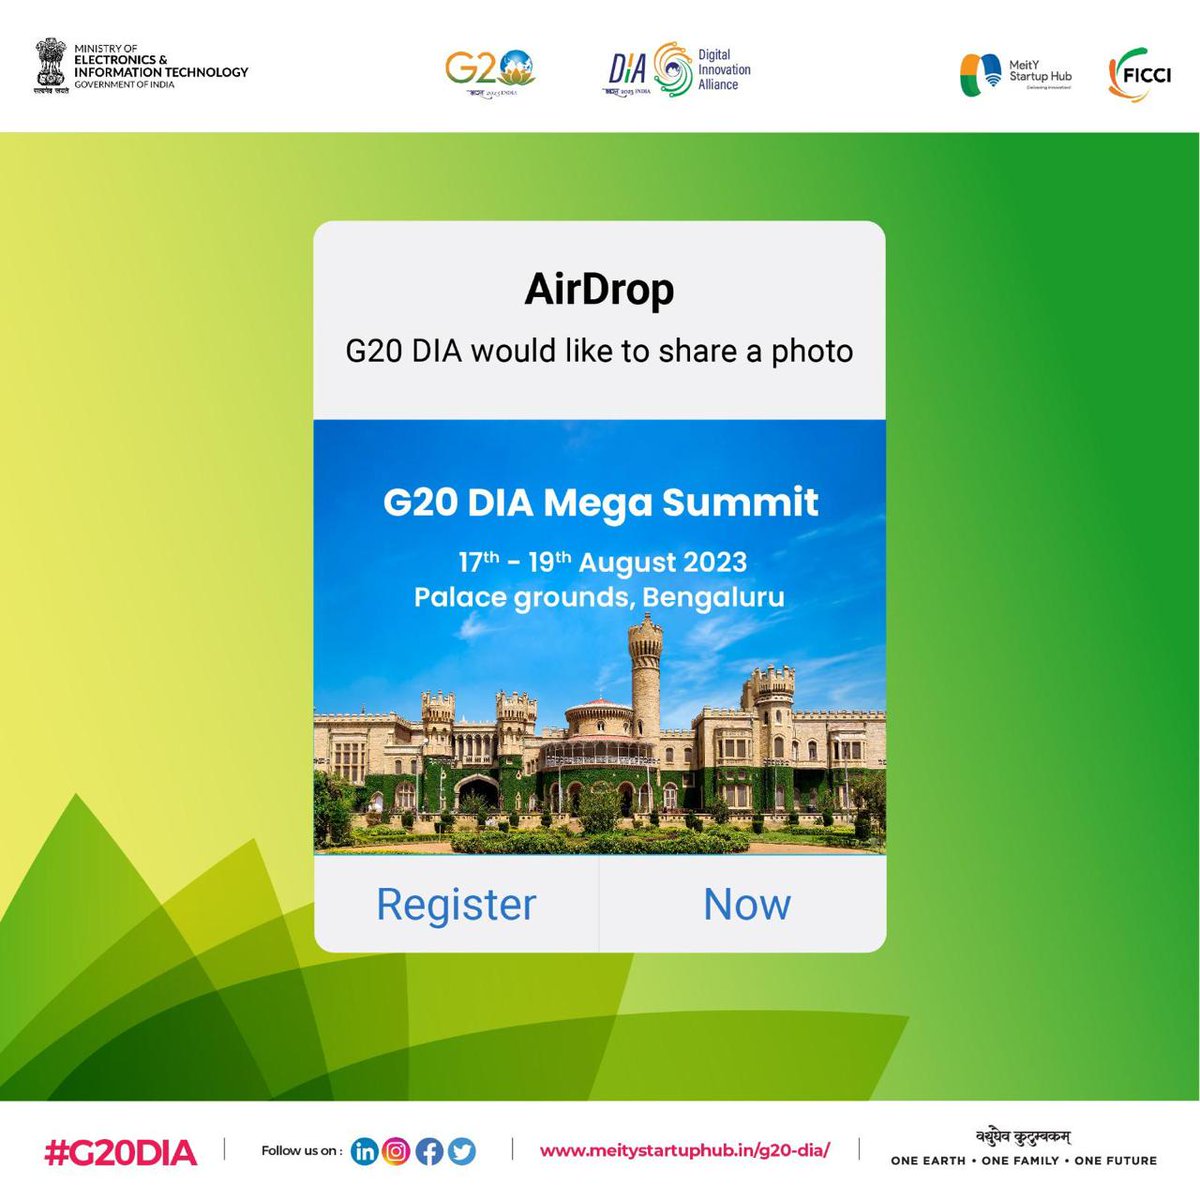 Click here for registration 👉rb.gy/63038

#G20 #internationalevent #g20dia #meghasummit